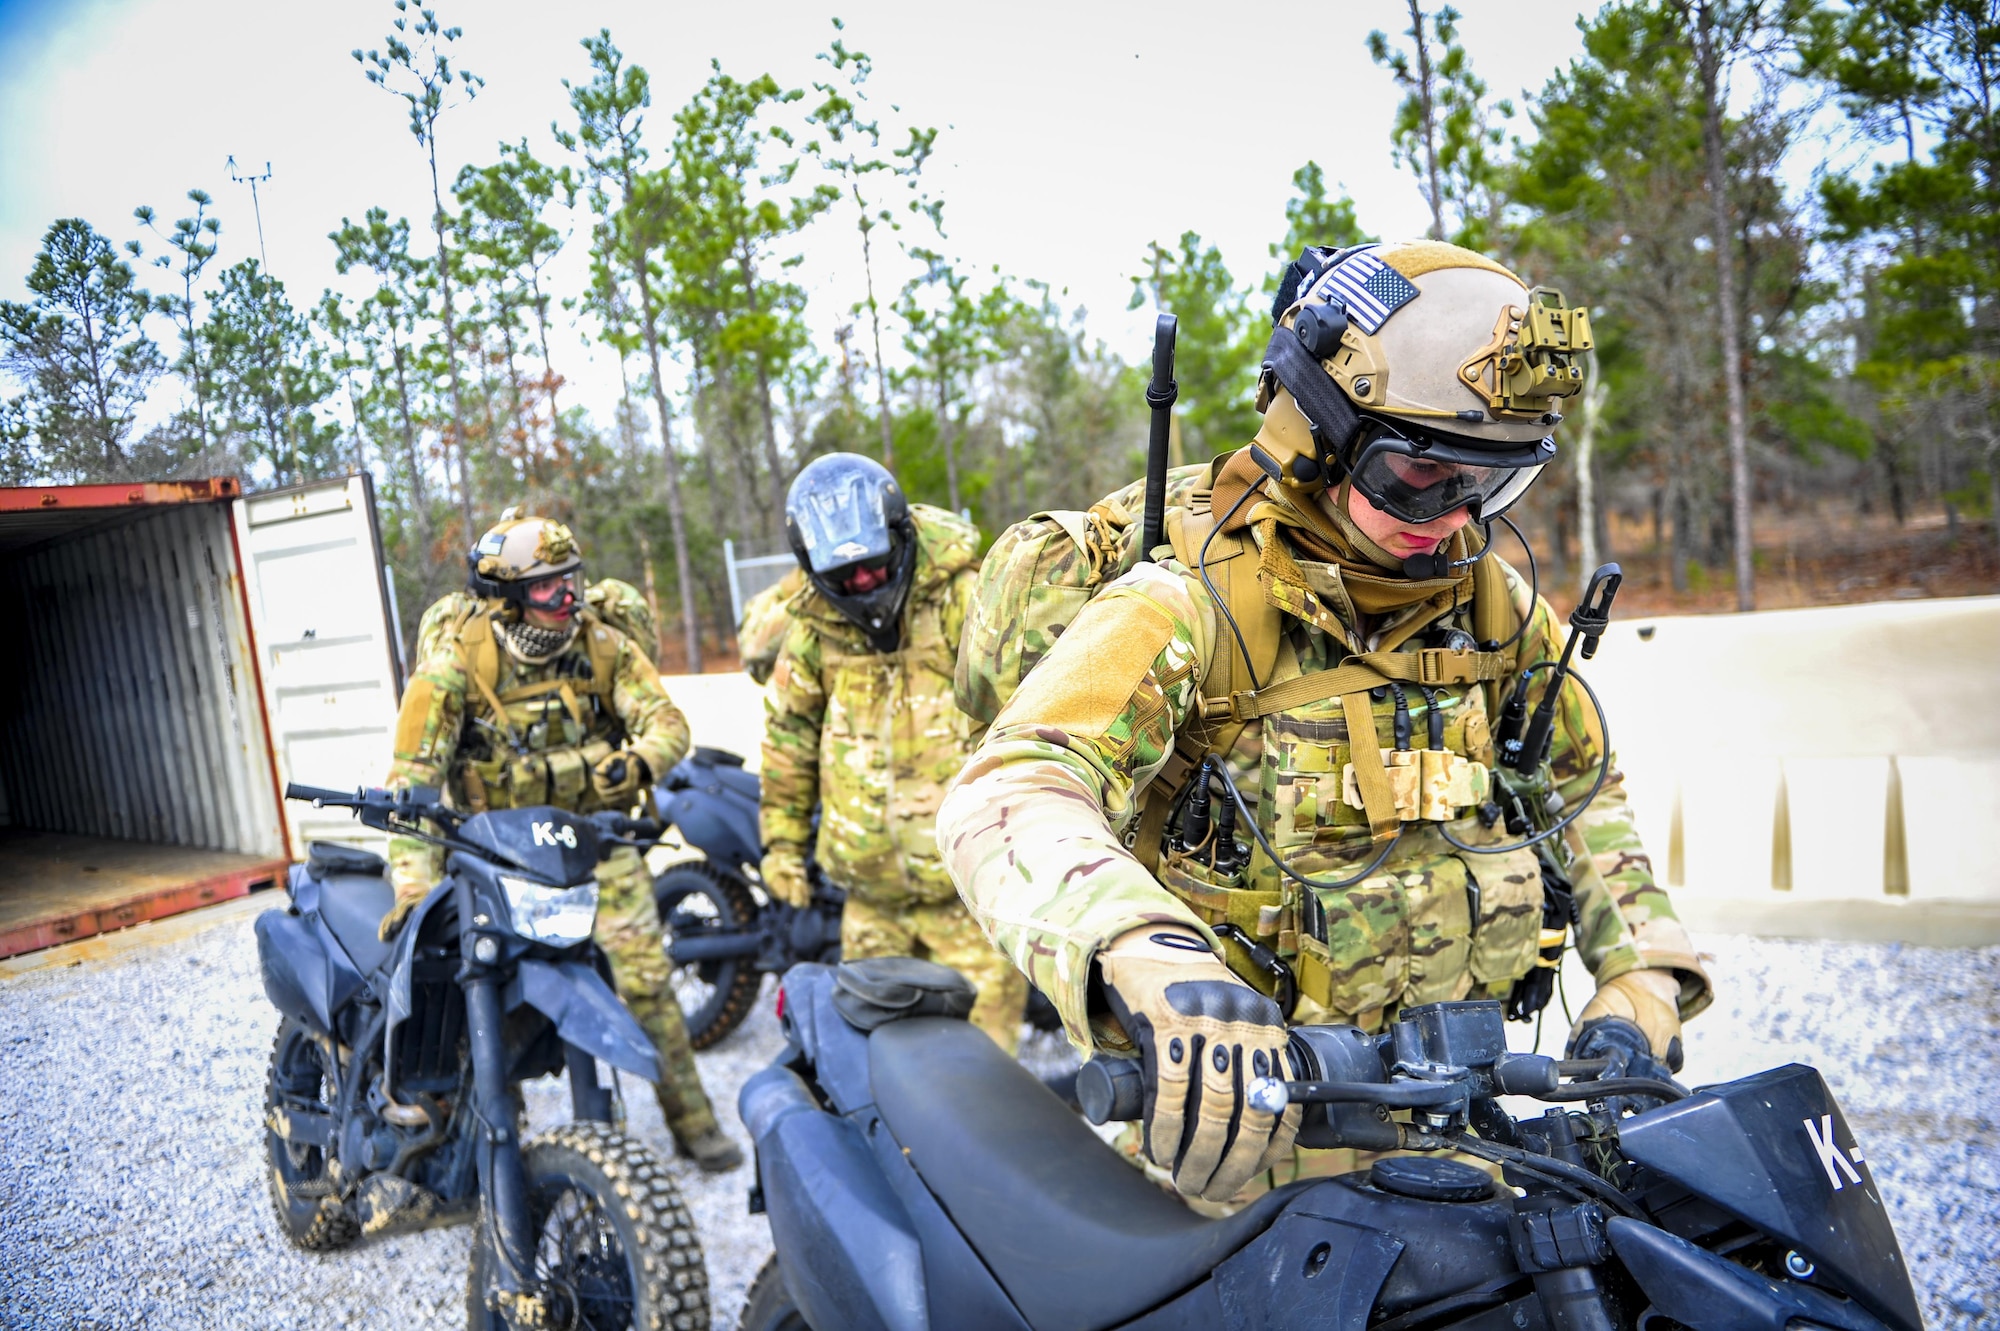 Airmen from the Special Tactics Training Squadron, 24th Special Operations Wing, Hurlburt Field, Fla., learn how to operate all-terrain vehicles during advanced tactical vehicle training at Eglin Range, Fla., Feb 1-4, 2015. The STTS trains special operations forces, including combat controllers and special tactics pararescueman, for rapid global employment to enable airpower success in austere and hostile environments. (U.S. Air Force photo by Senior Airman Christopher Callaway/Released)